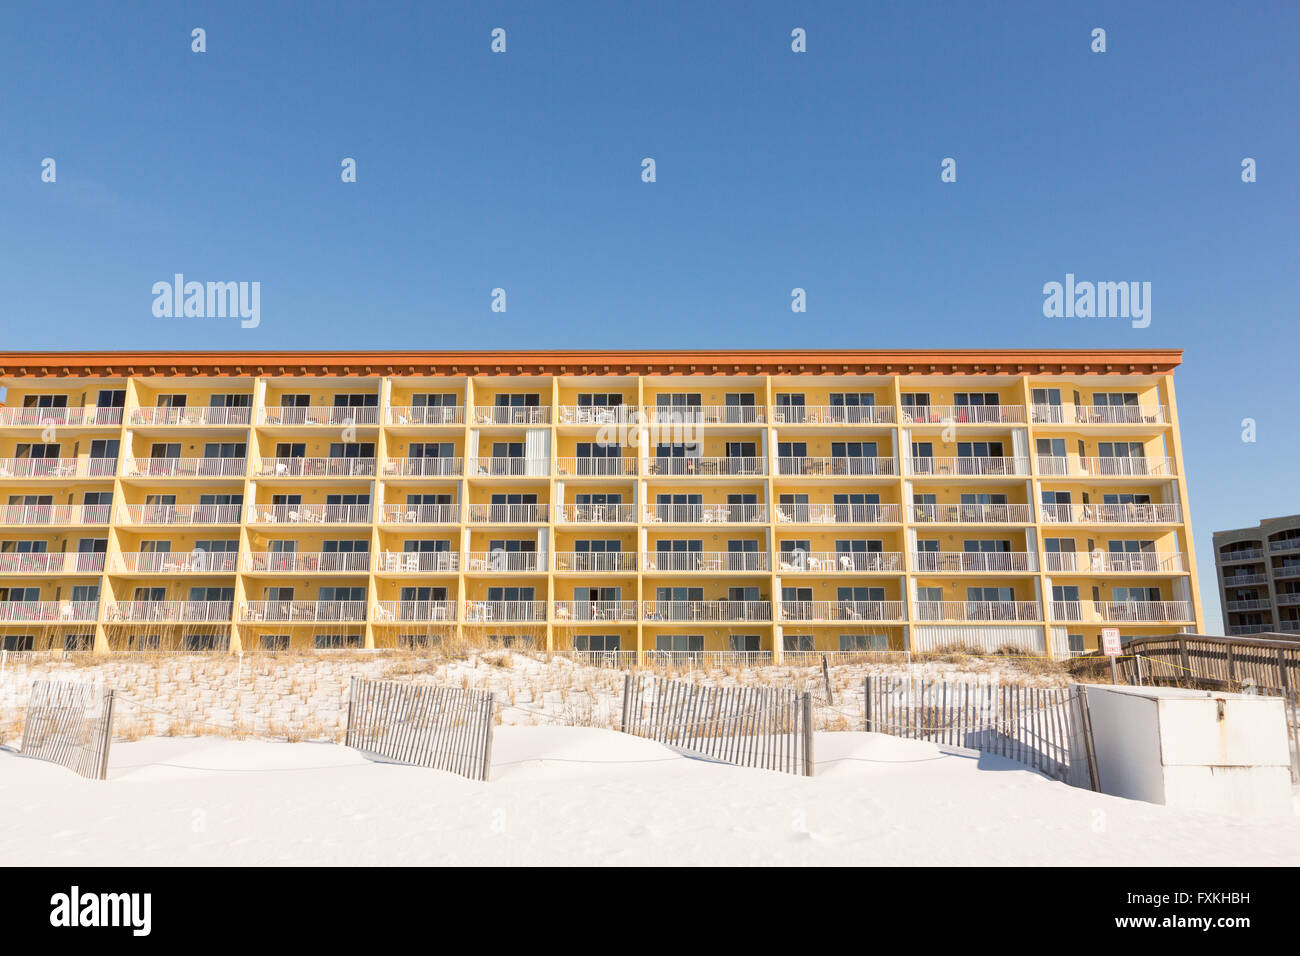 Hotel tower along the beach front in Fort Walton Beach, Florida. Stock Photo